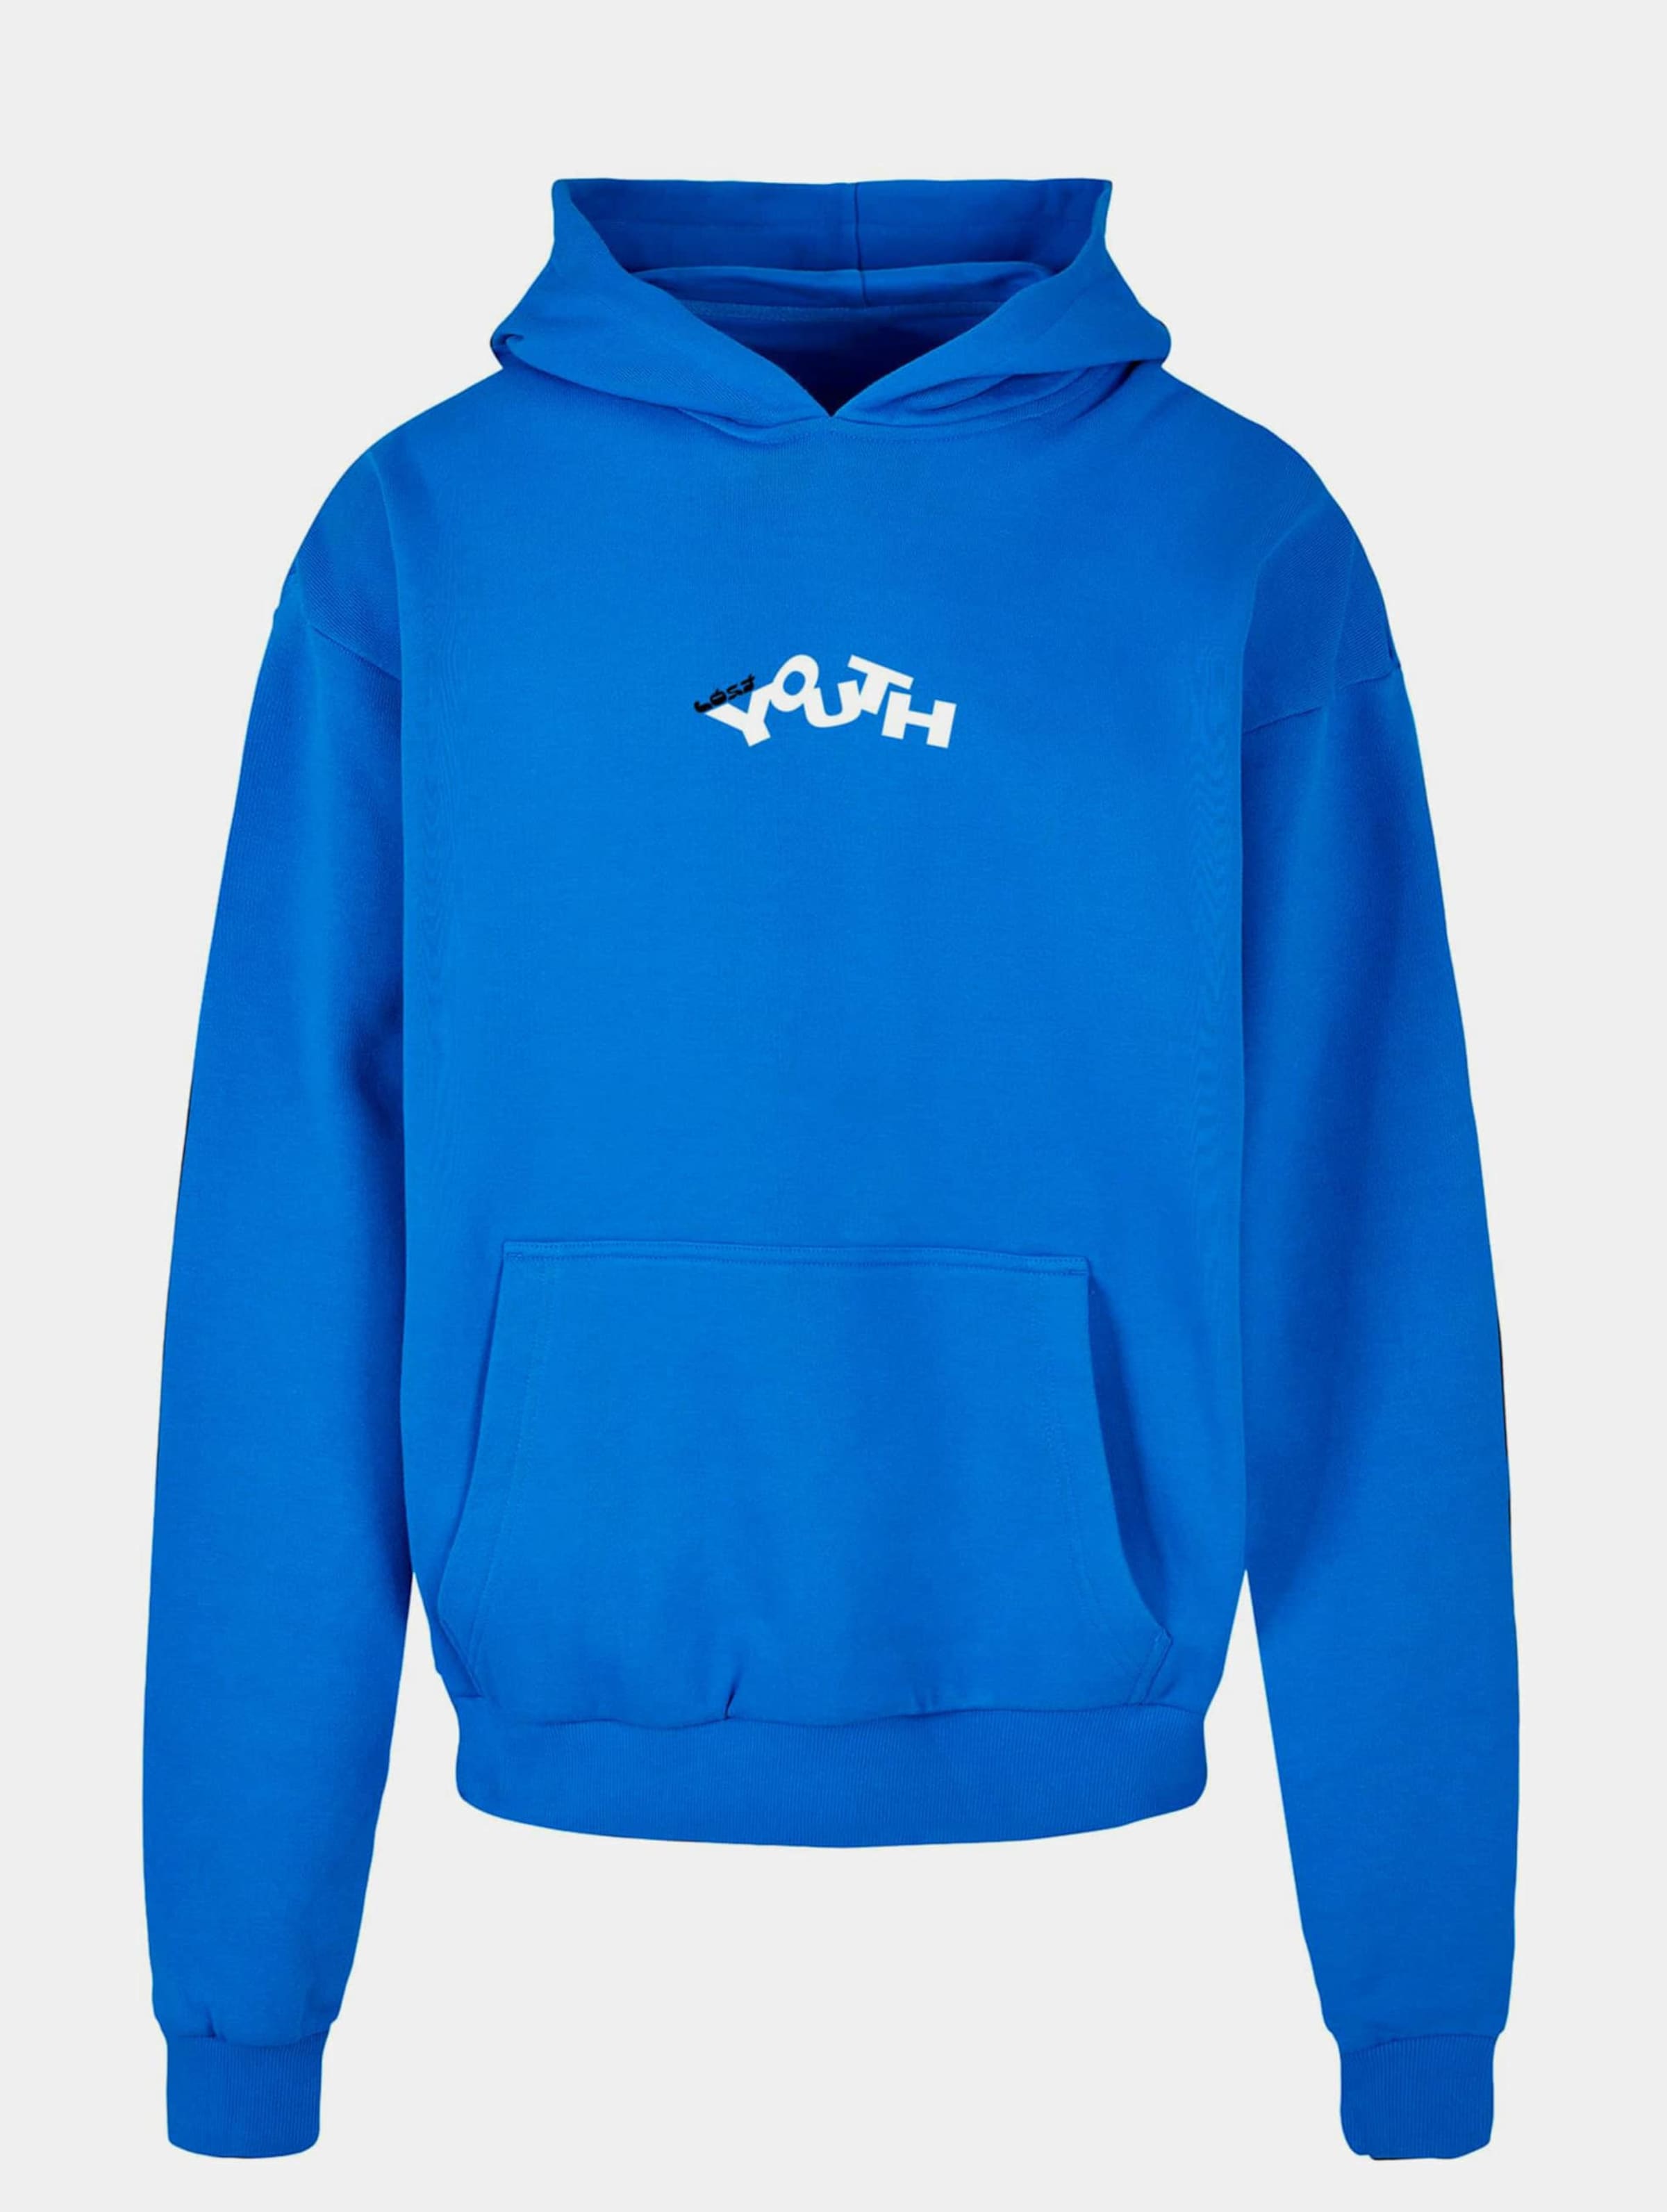 Lost Youth LY HOODIE ''YOUTH'' Mannen op kleur blauw, Maat L